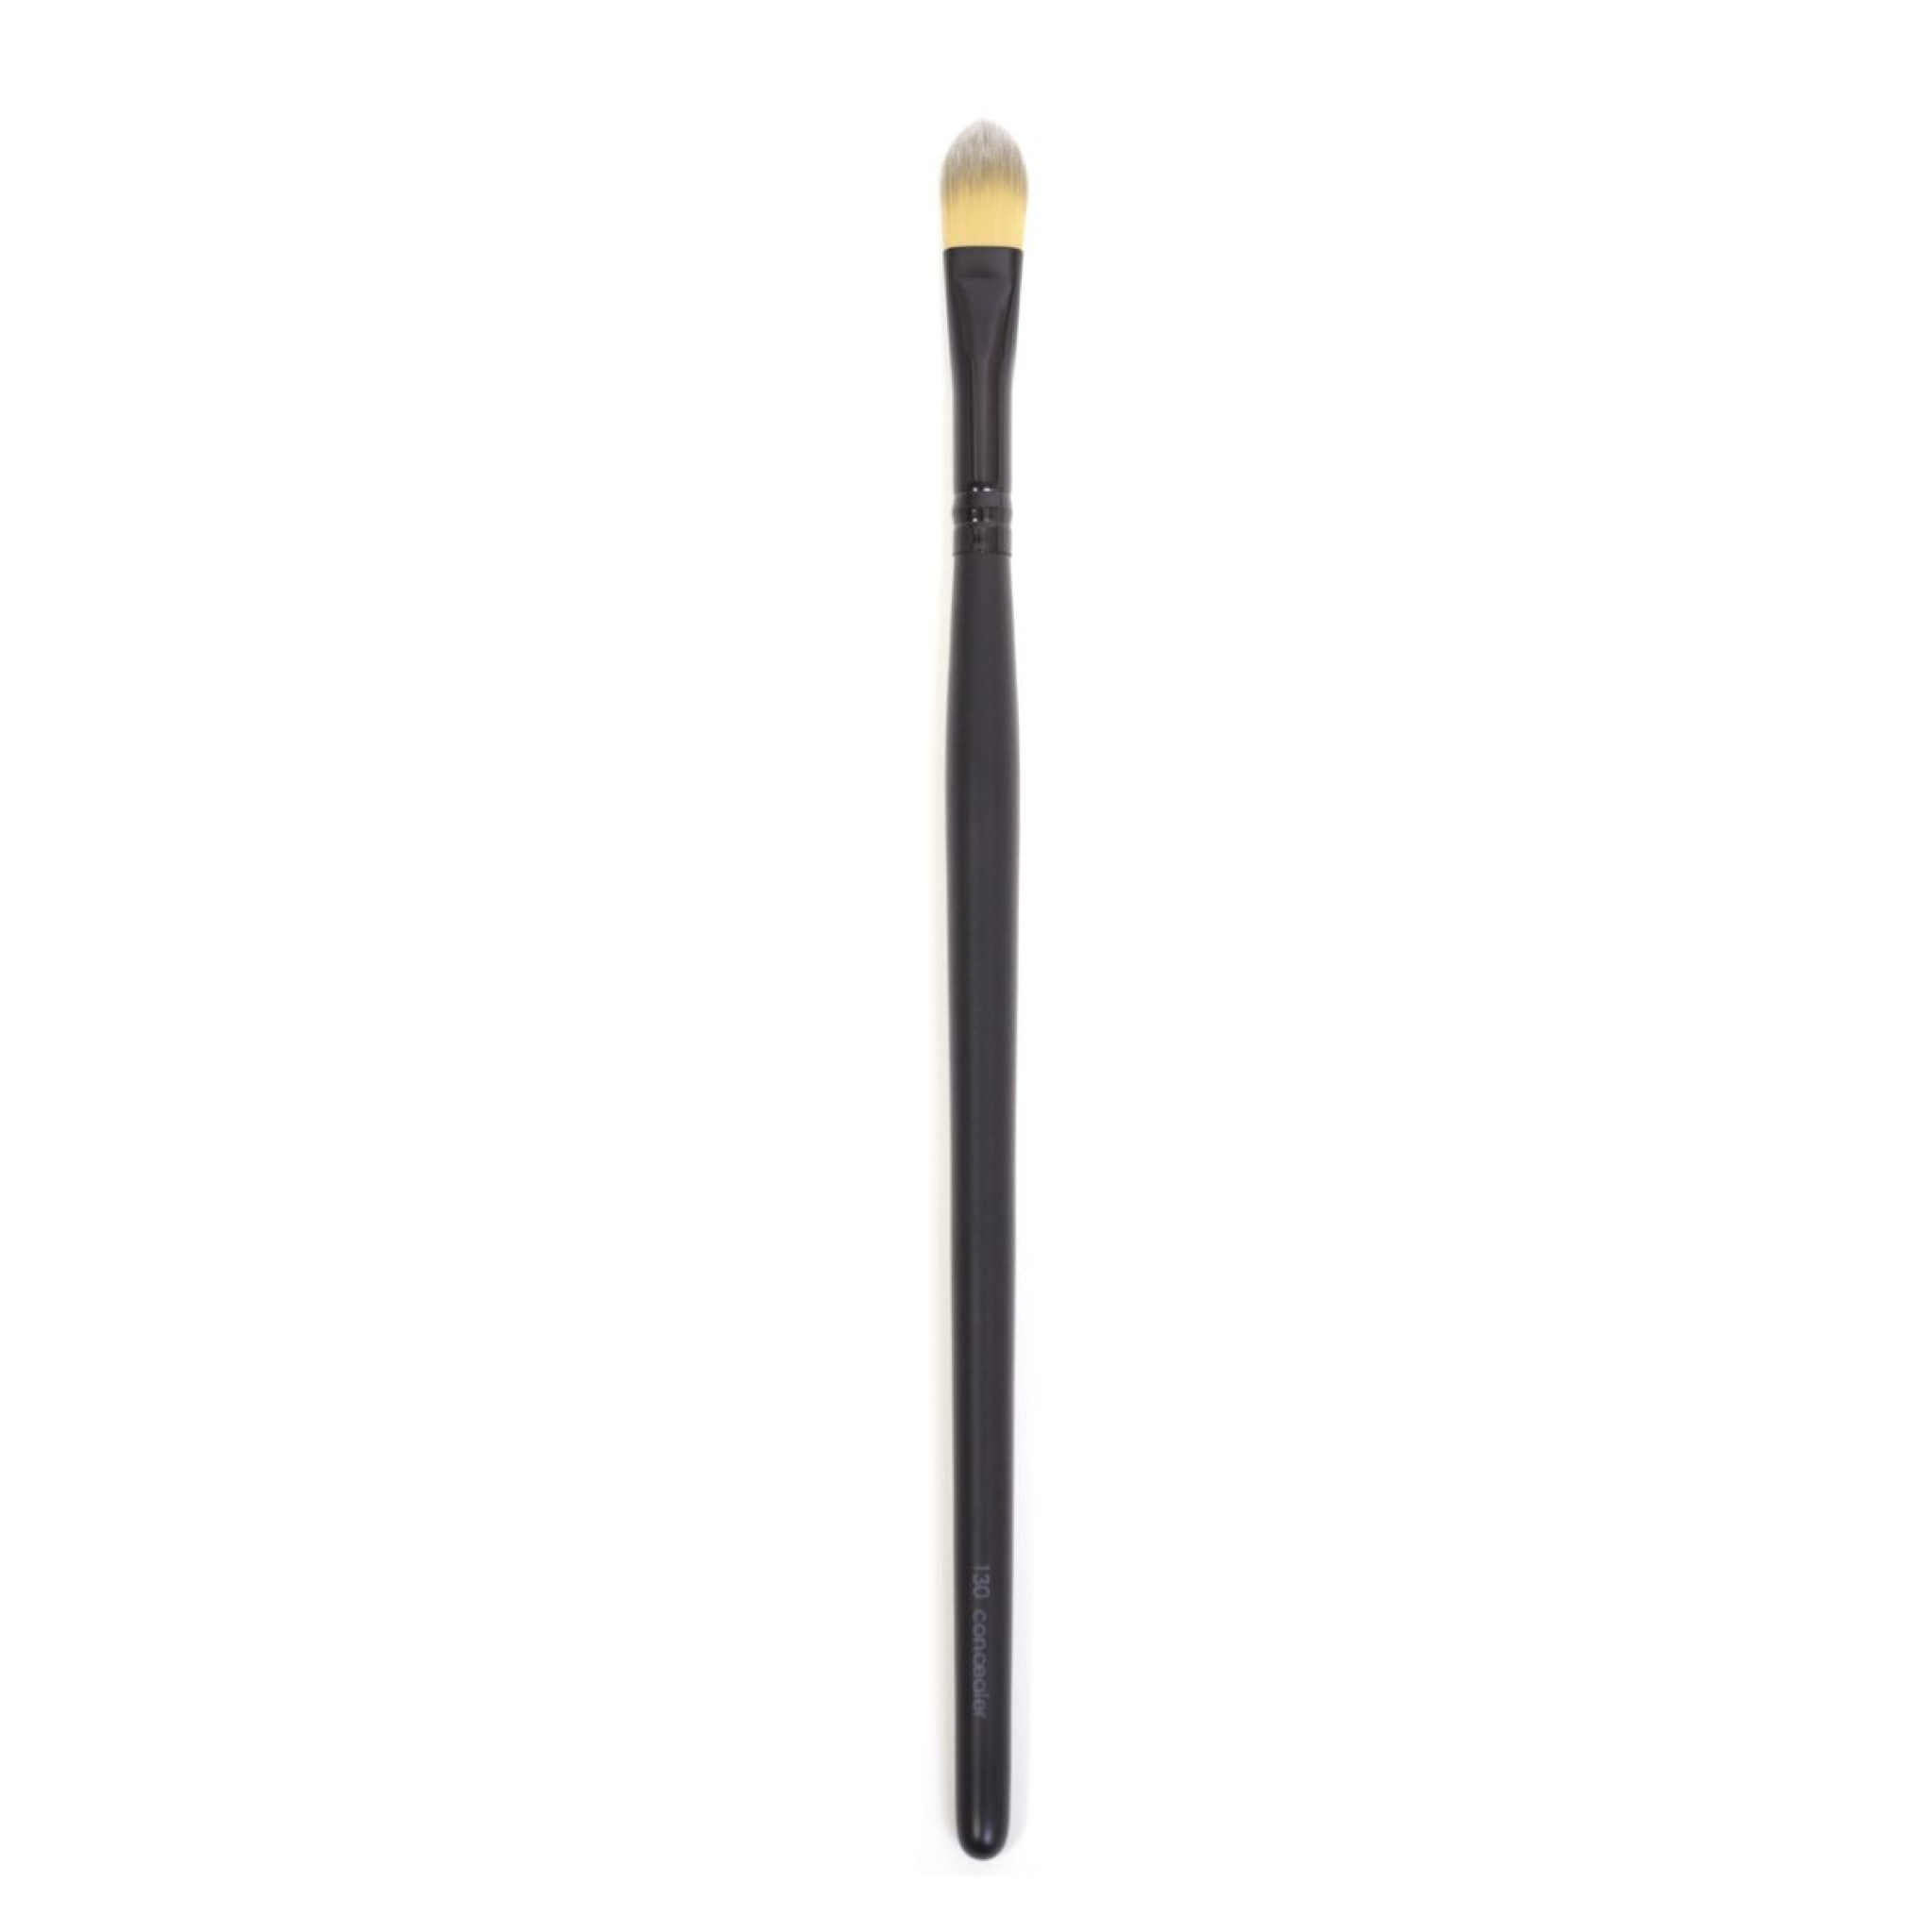 Spot/Concealer (Henna Outline Cleaning Brush) - Panoply Beauty 